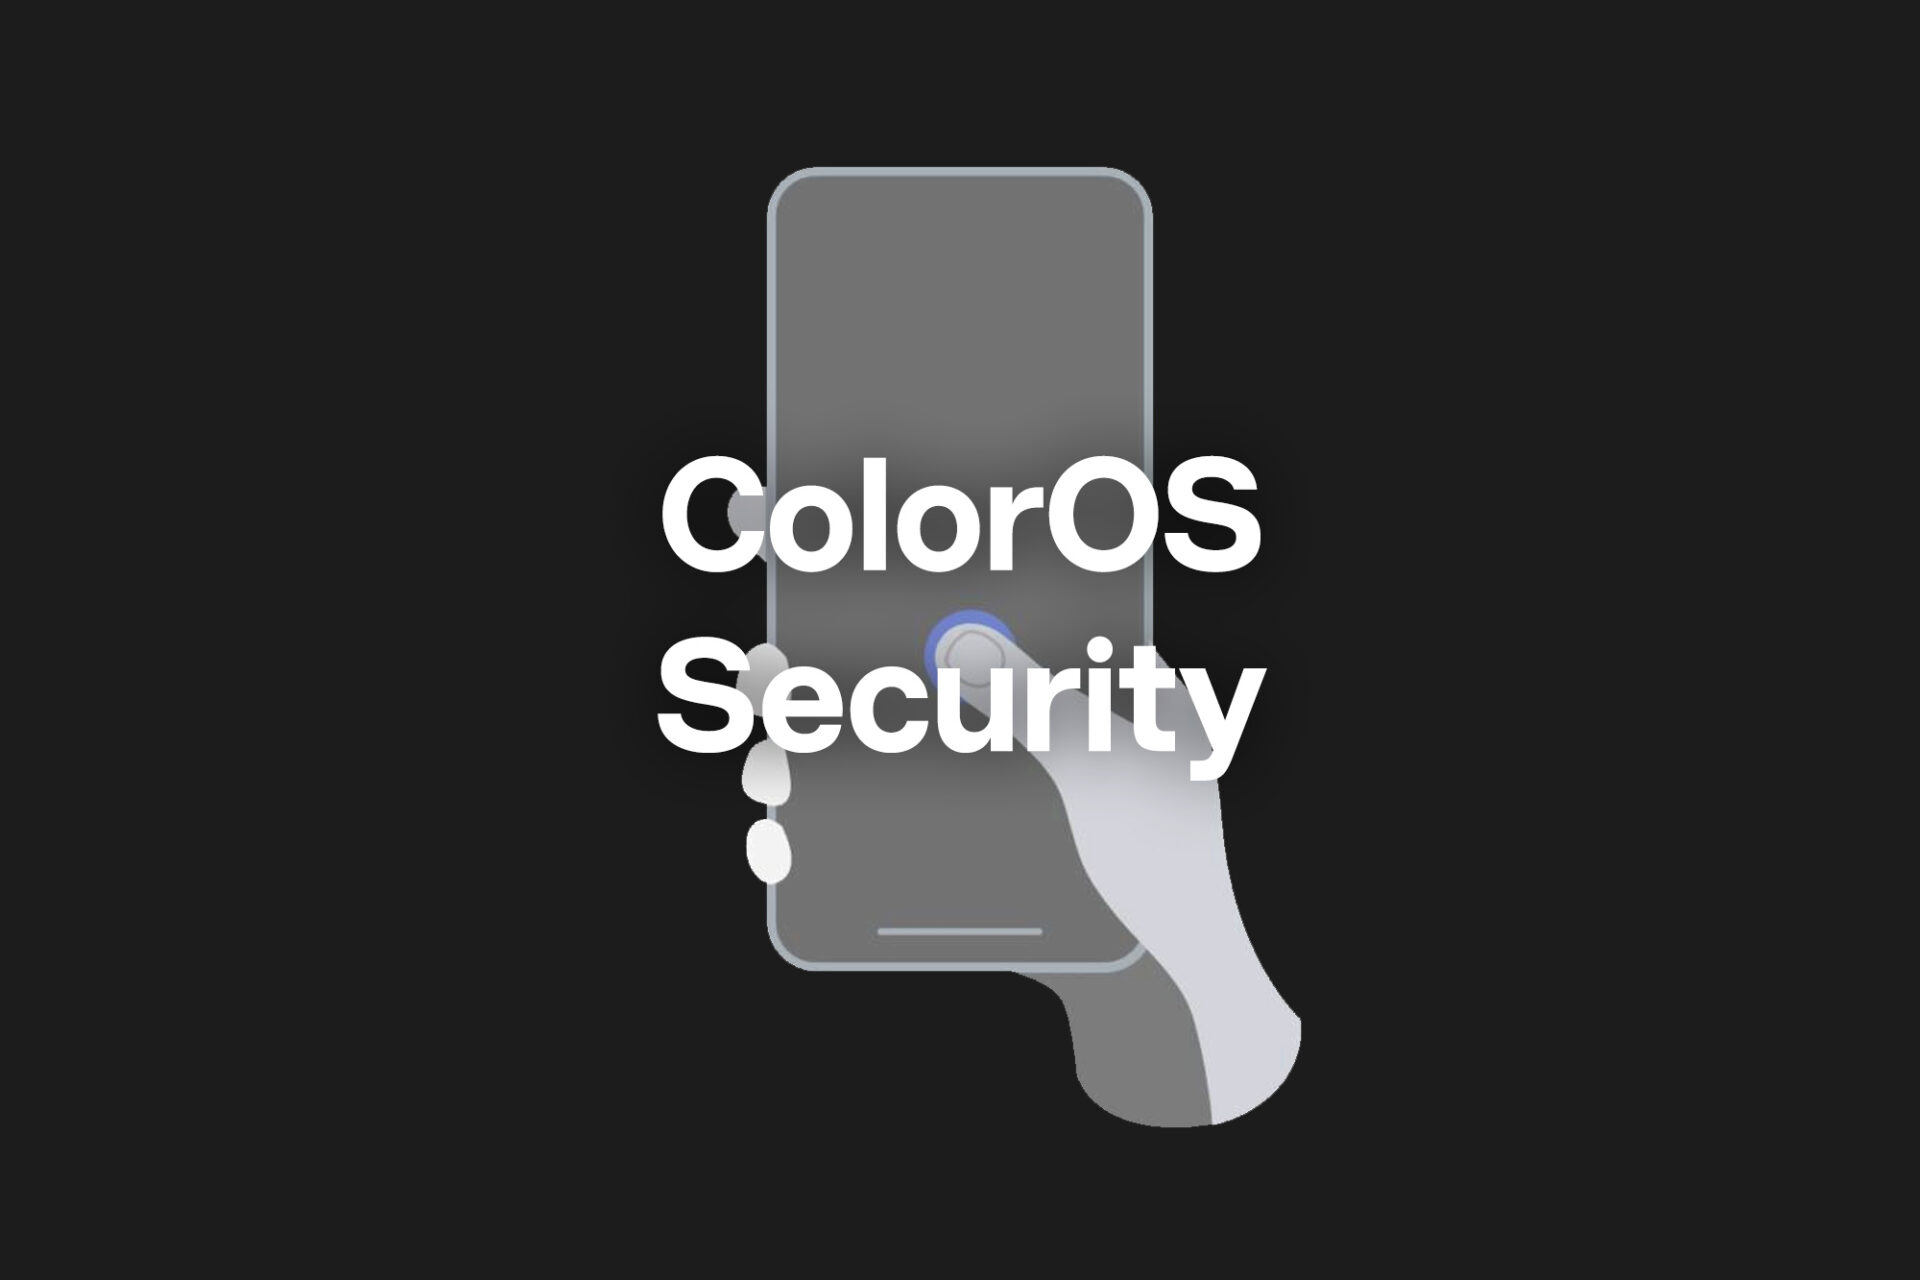 How to use fingerprint and face recognition in ColorOS?